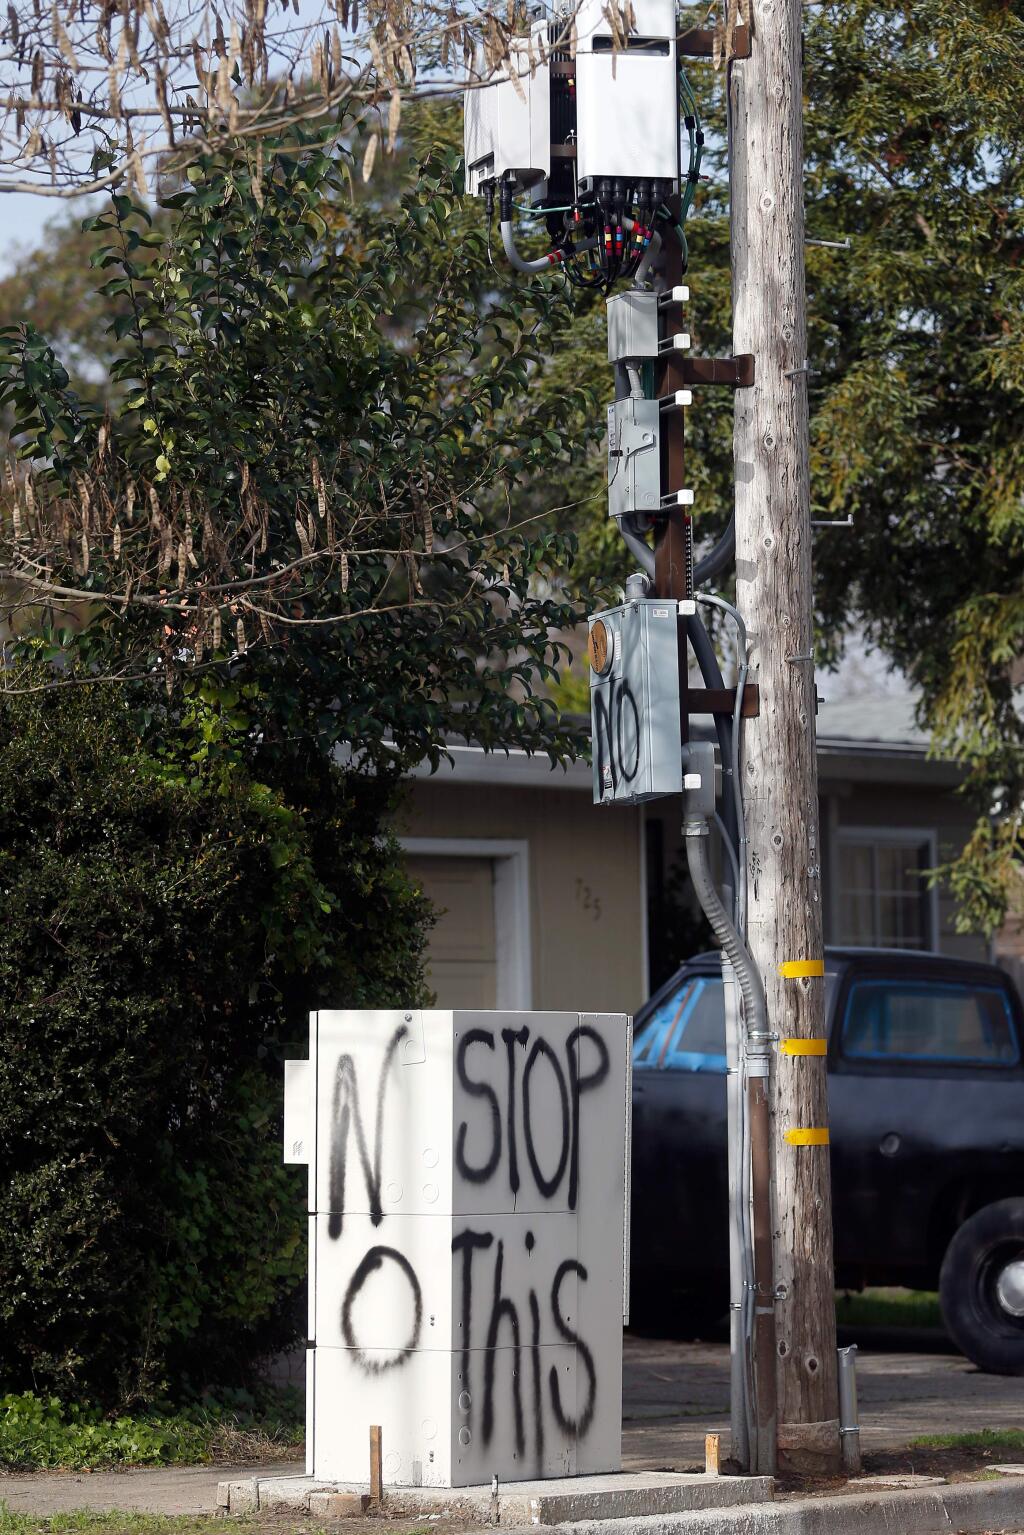 Graffiti done by an unknown person covers the in-ground utility box and part of the related cell signal booster on a utility pole in Santa Rosa. Neighbors objected to the Verizon equipment being installed without their knowldge. (Alvin Jornada / The Press Democrat)